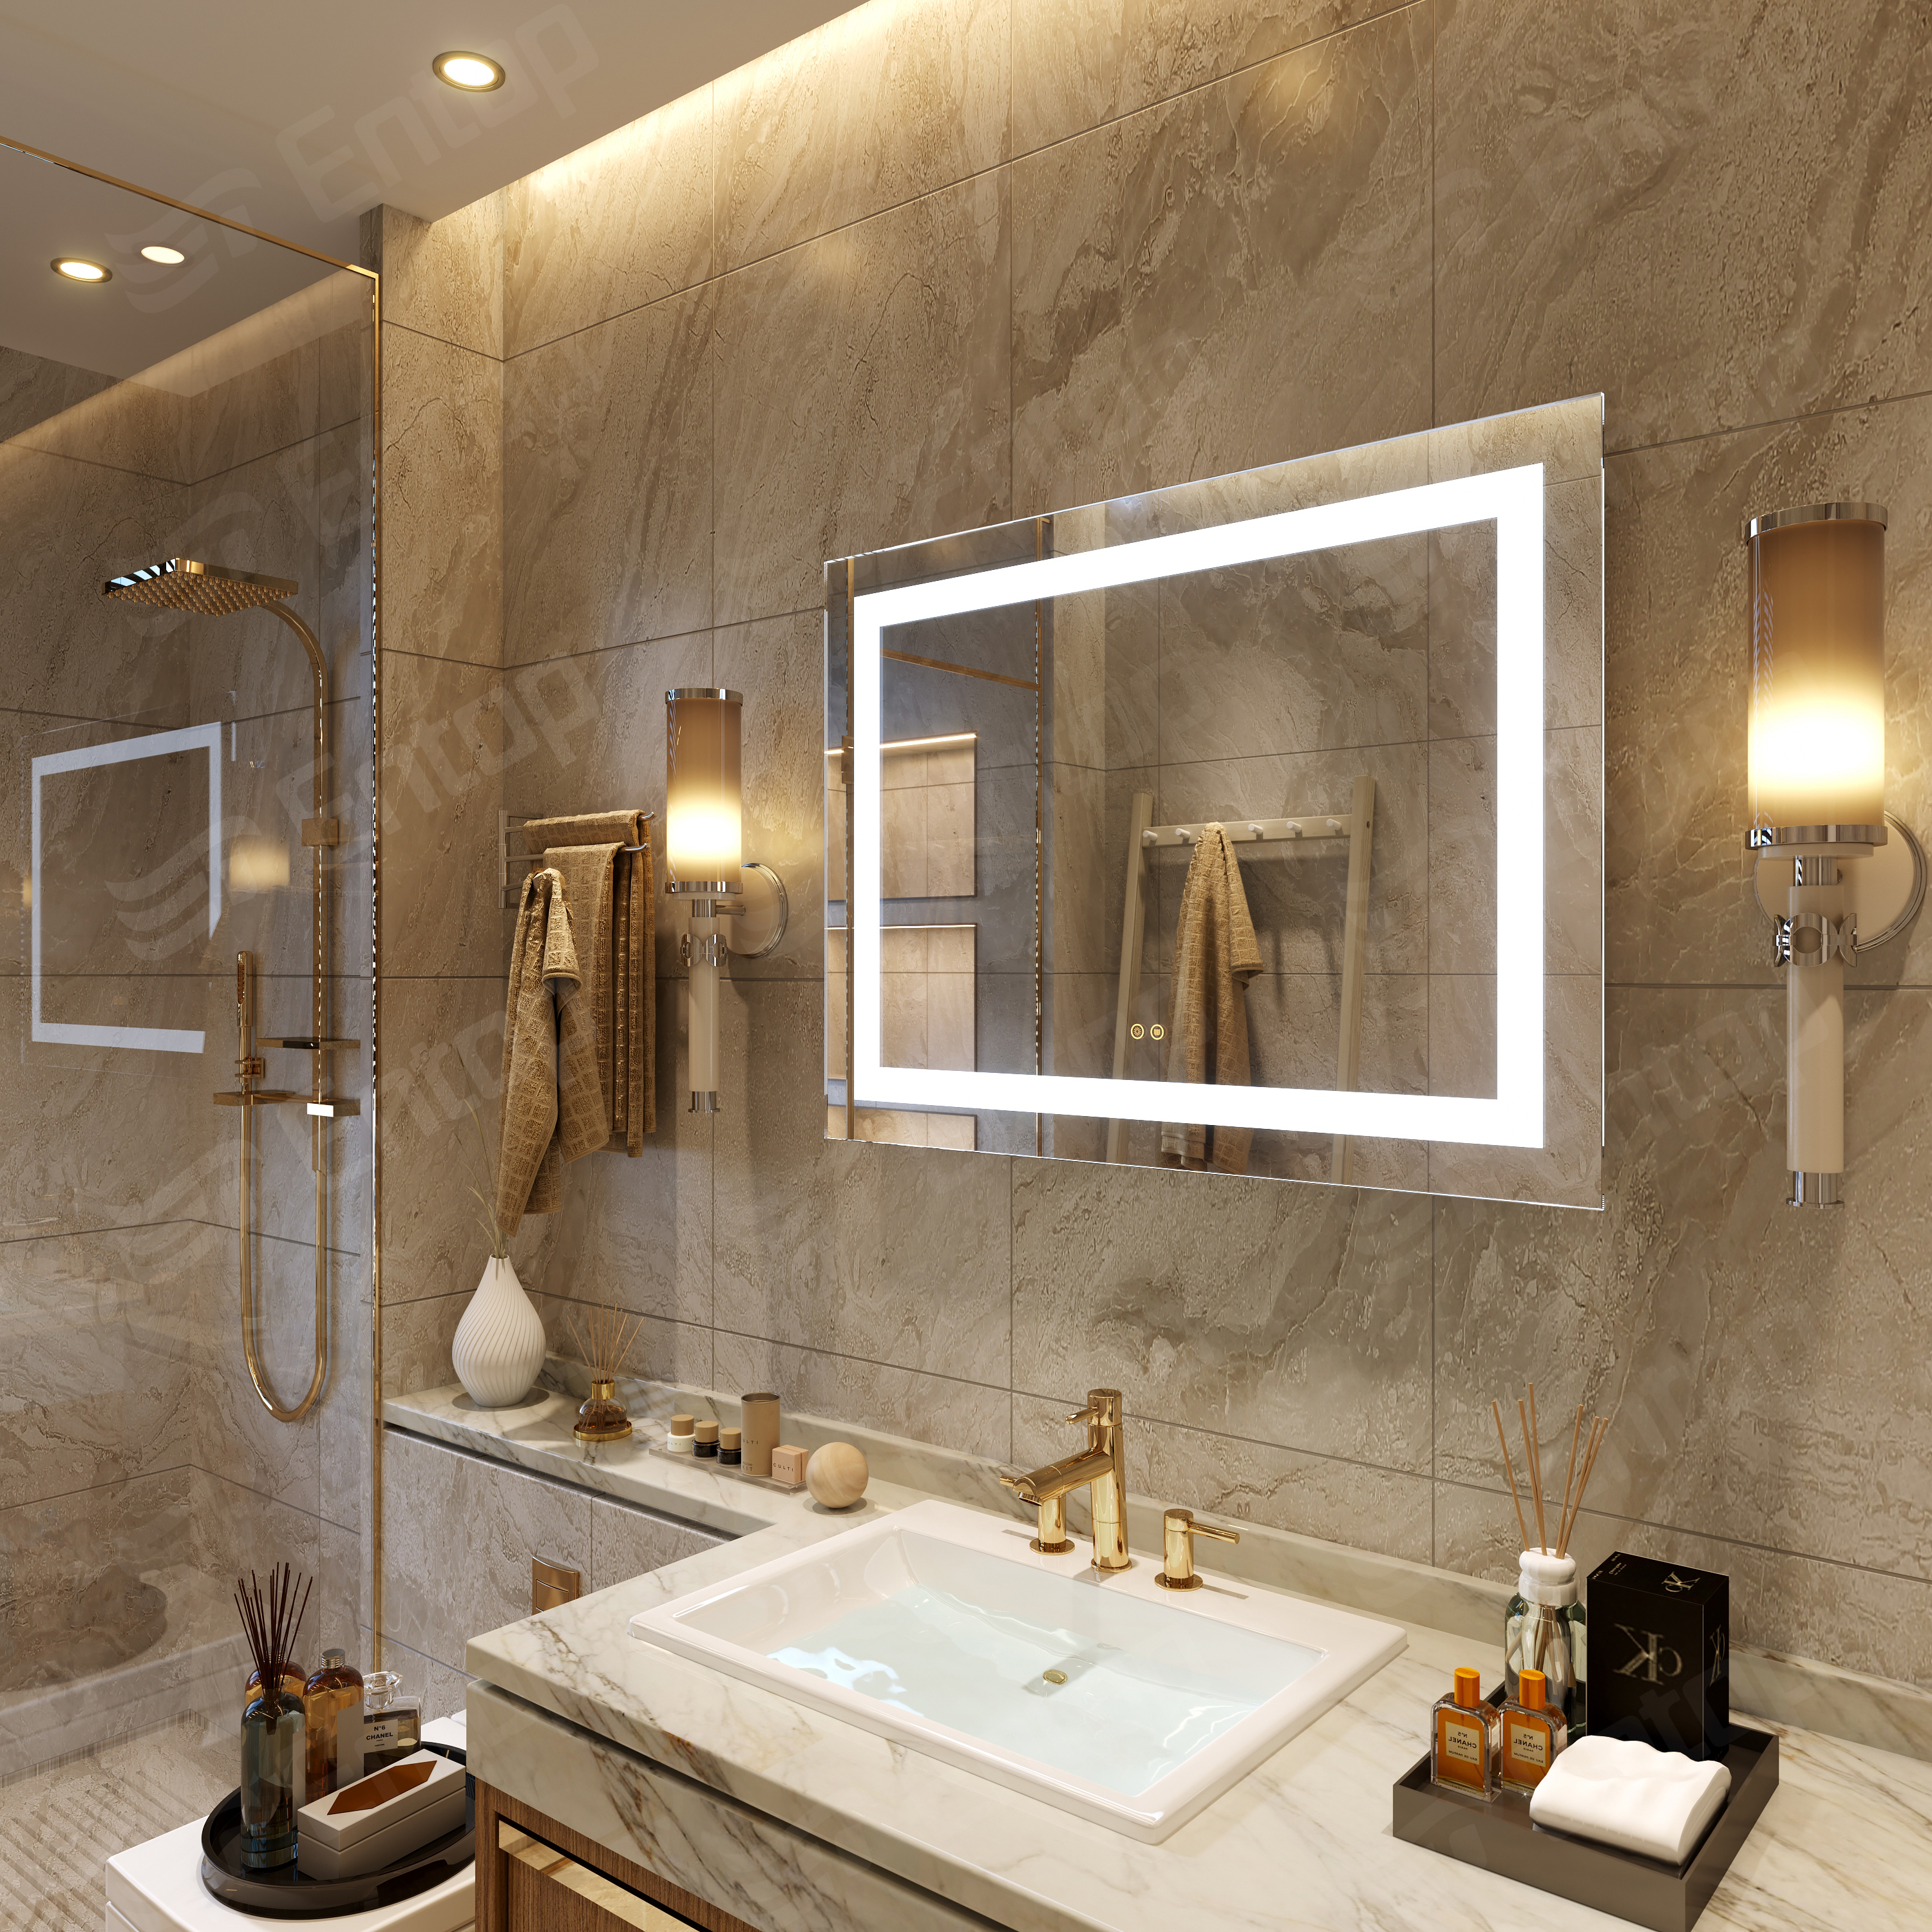 LED Mirror With Lights Rectangle Mirror Bathroom Wall Manufacture